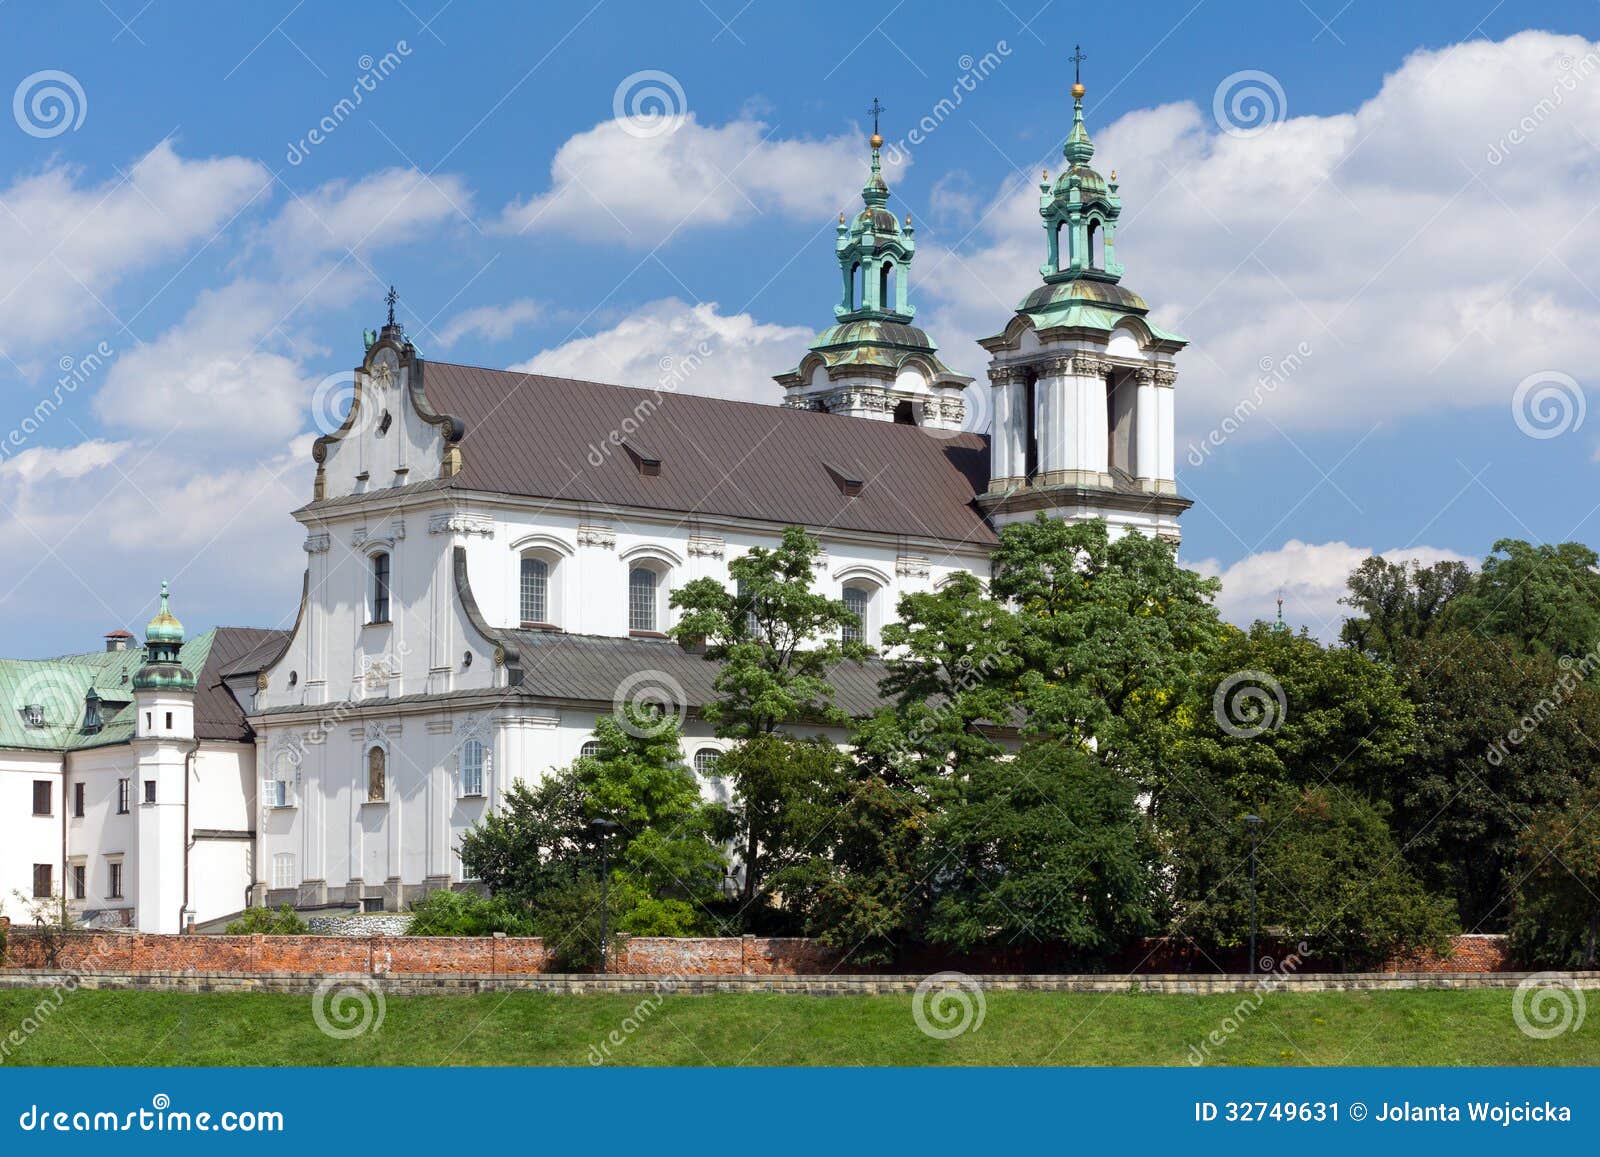 view on skalka church in old town of cracow in poland